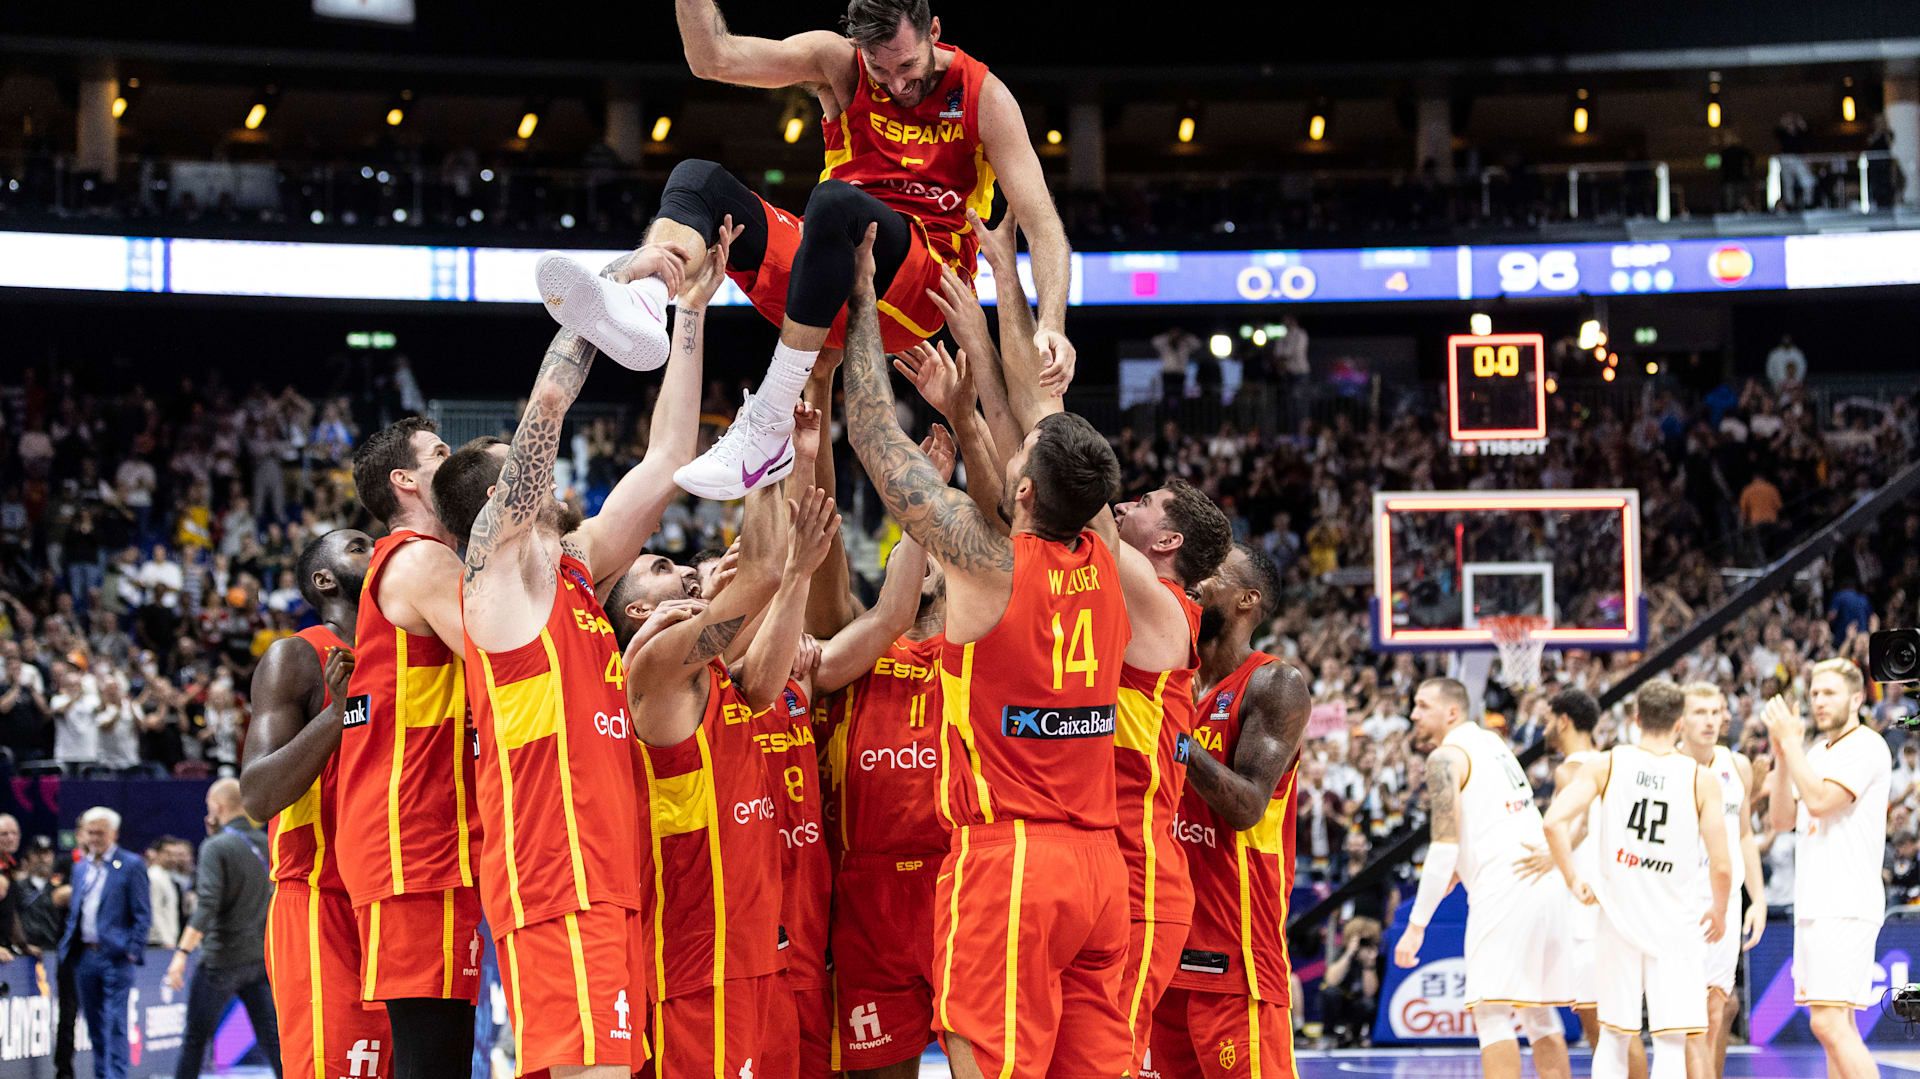 EuroBasket 2022 Final Preview, schedule, and how to watch NBA stars for Spain and France